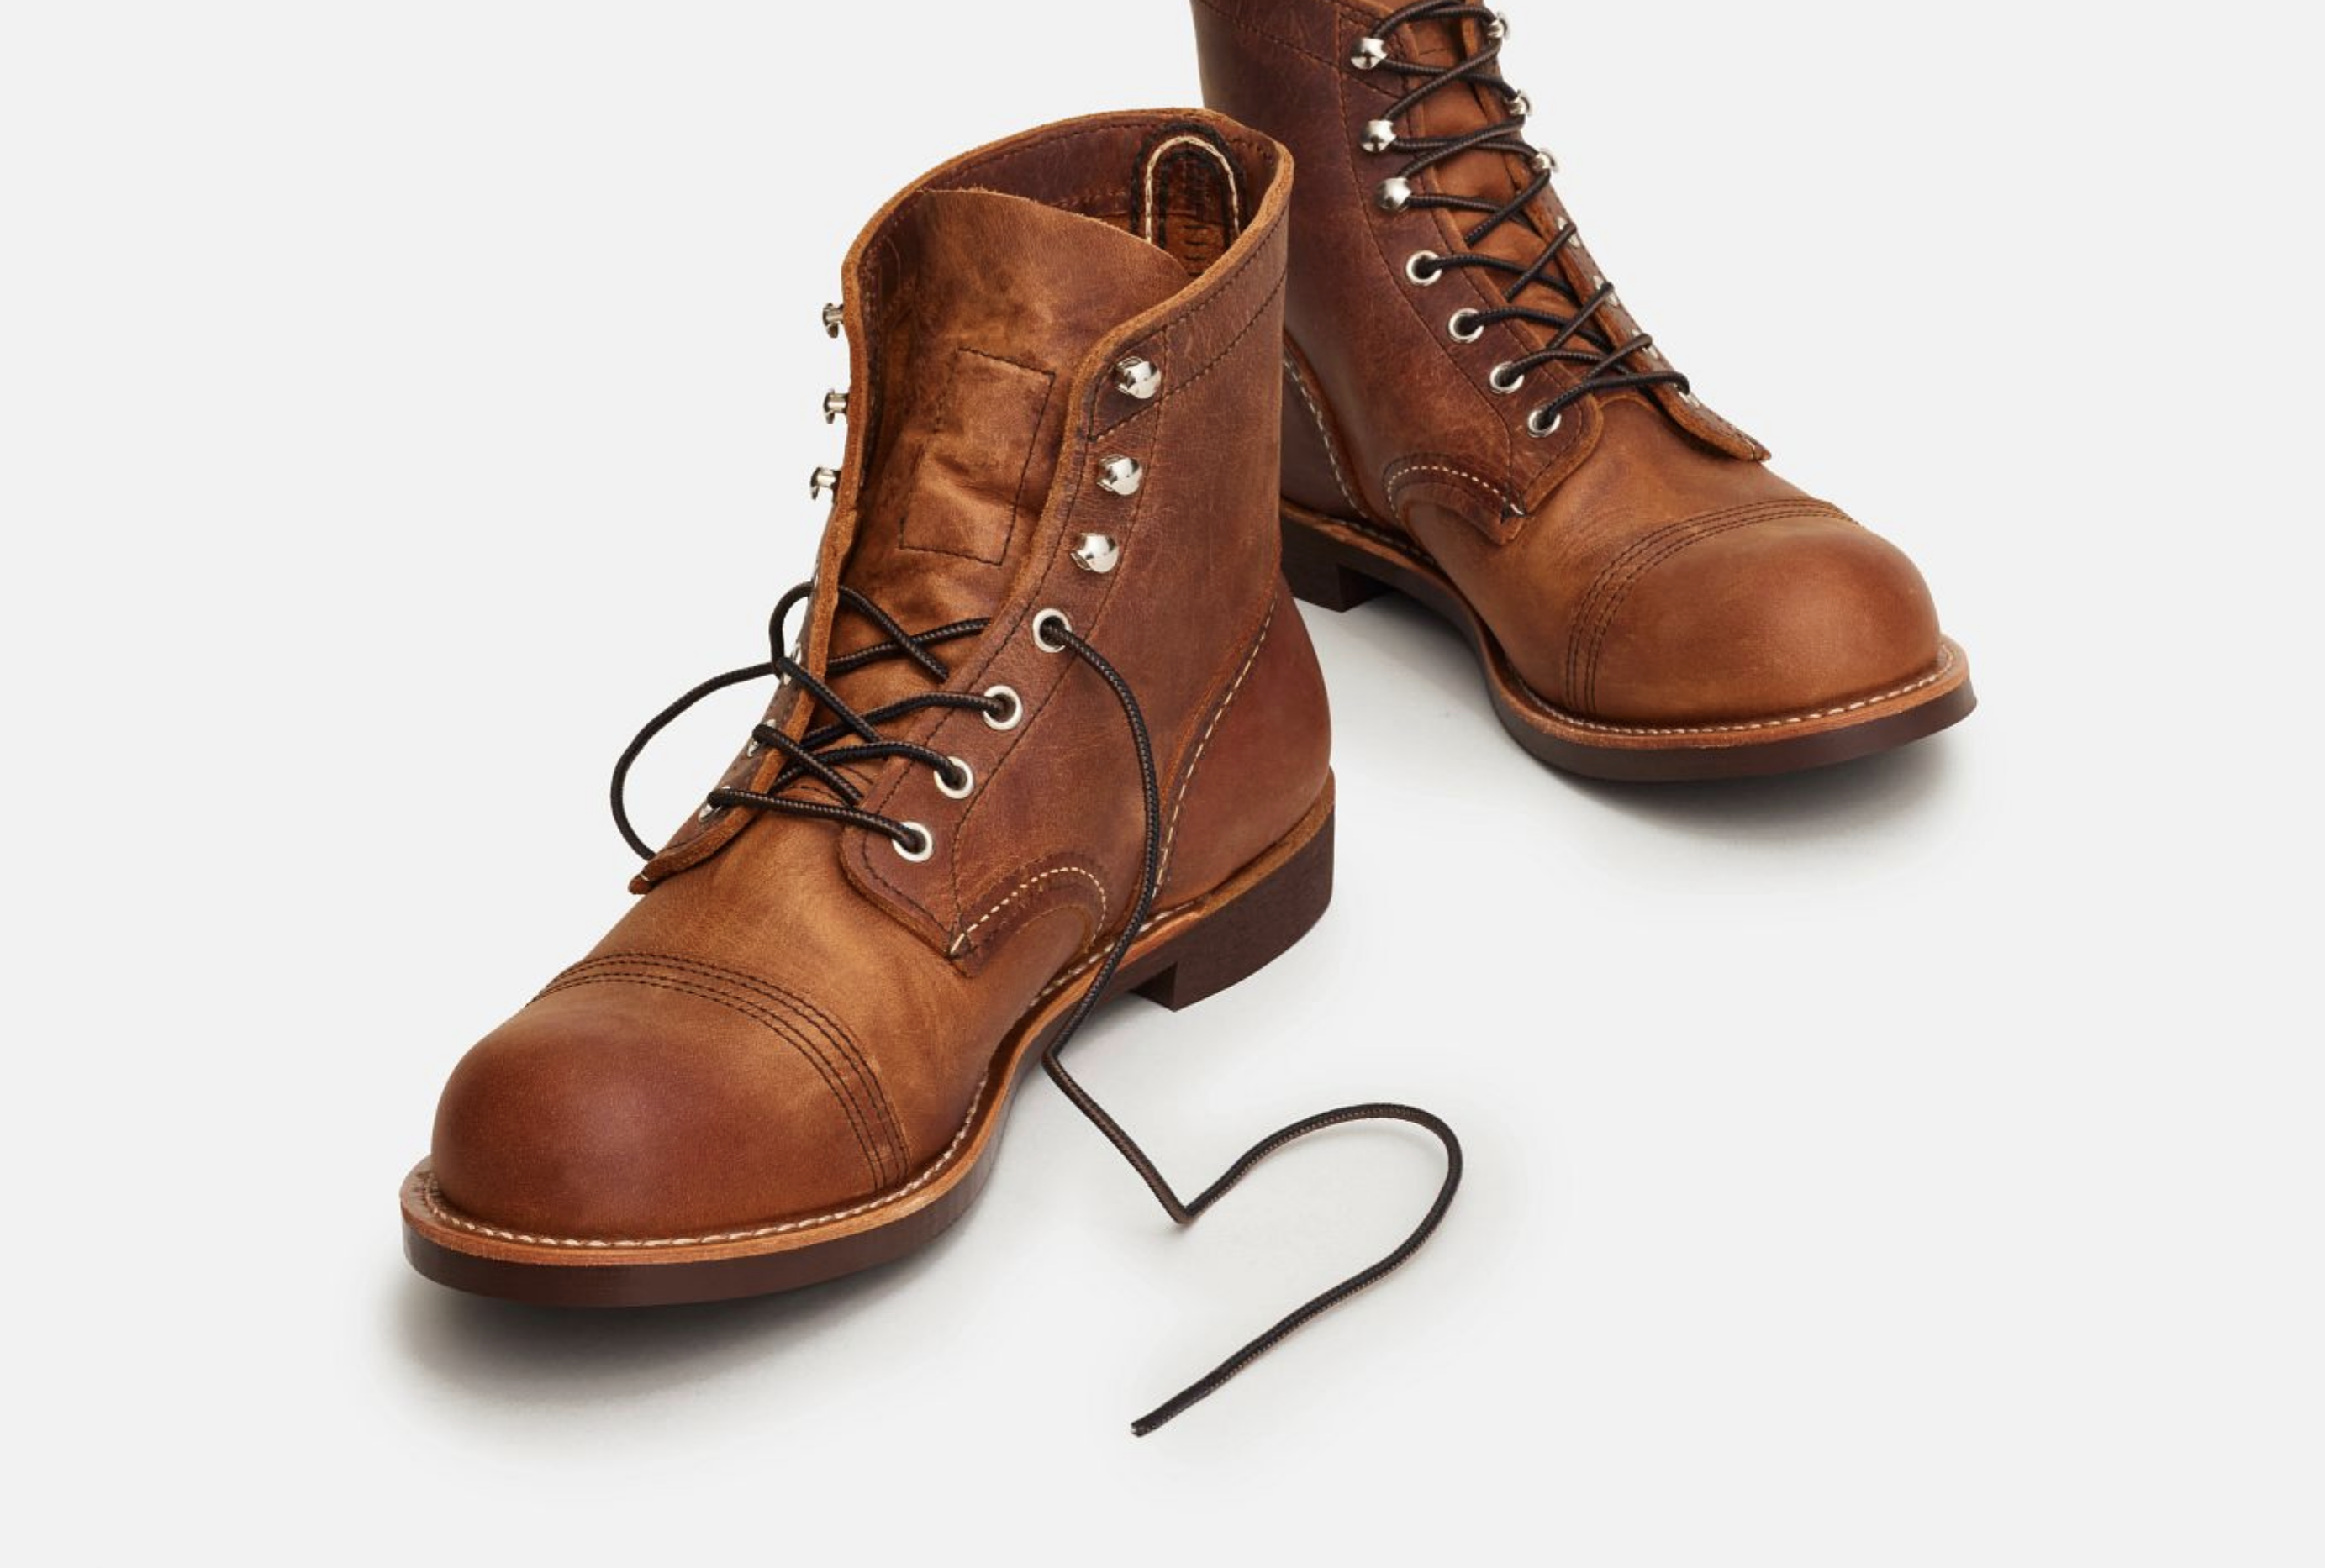 No. 8085 - Red Wing Heritage Iron Ranger in Copper Rough & Tough Leather